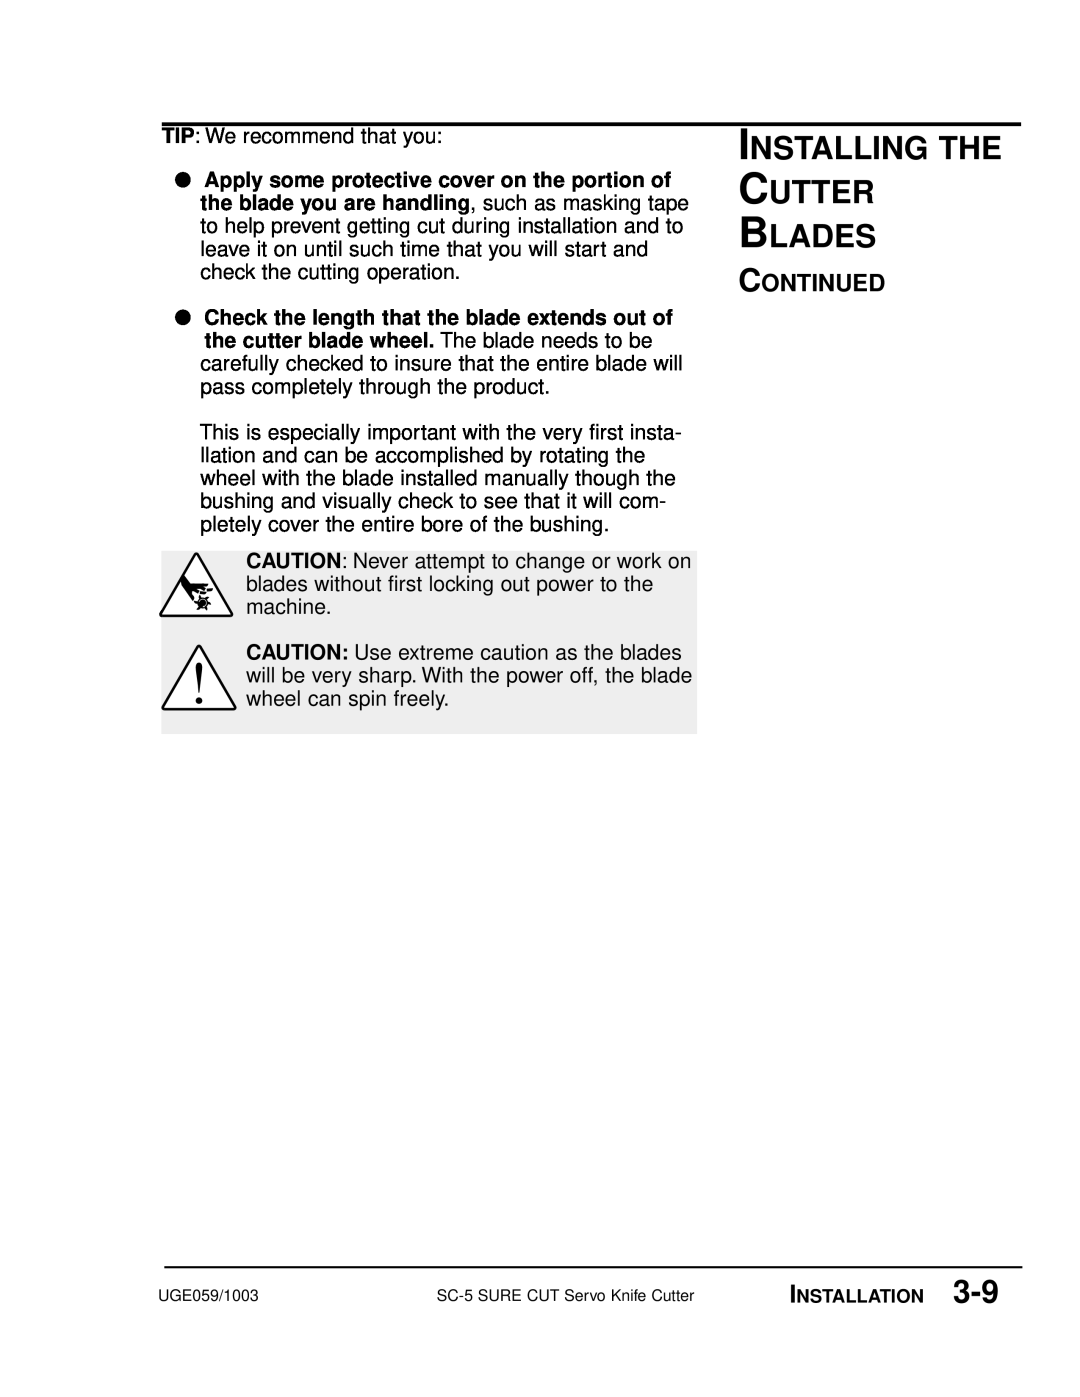 Conair SC-5 manual Installing The Cutter Blades, Continued, TIP We recommend that you 